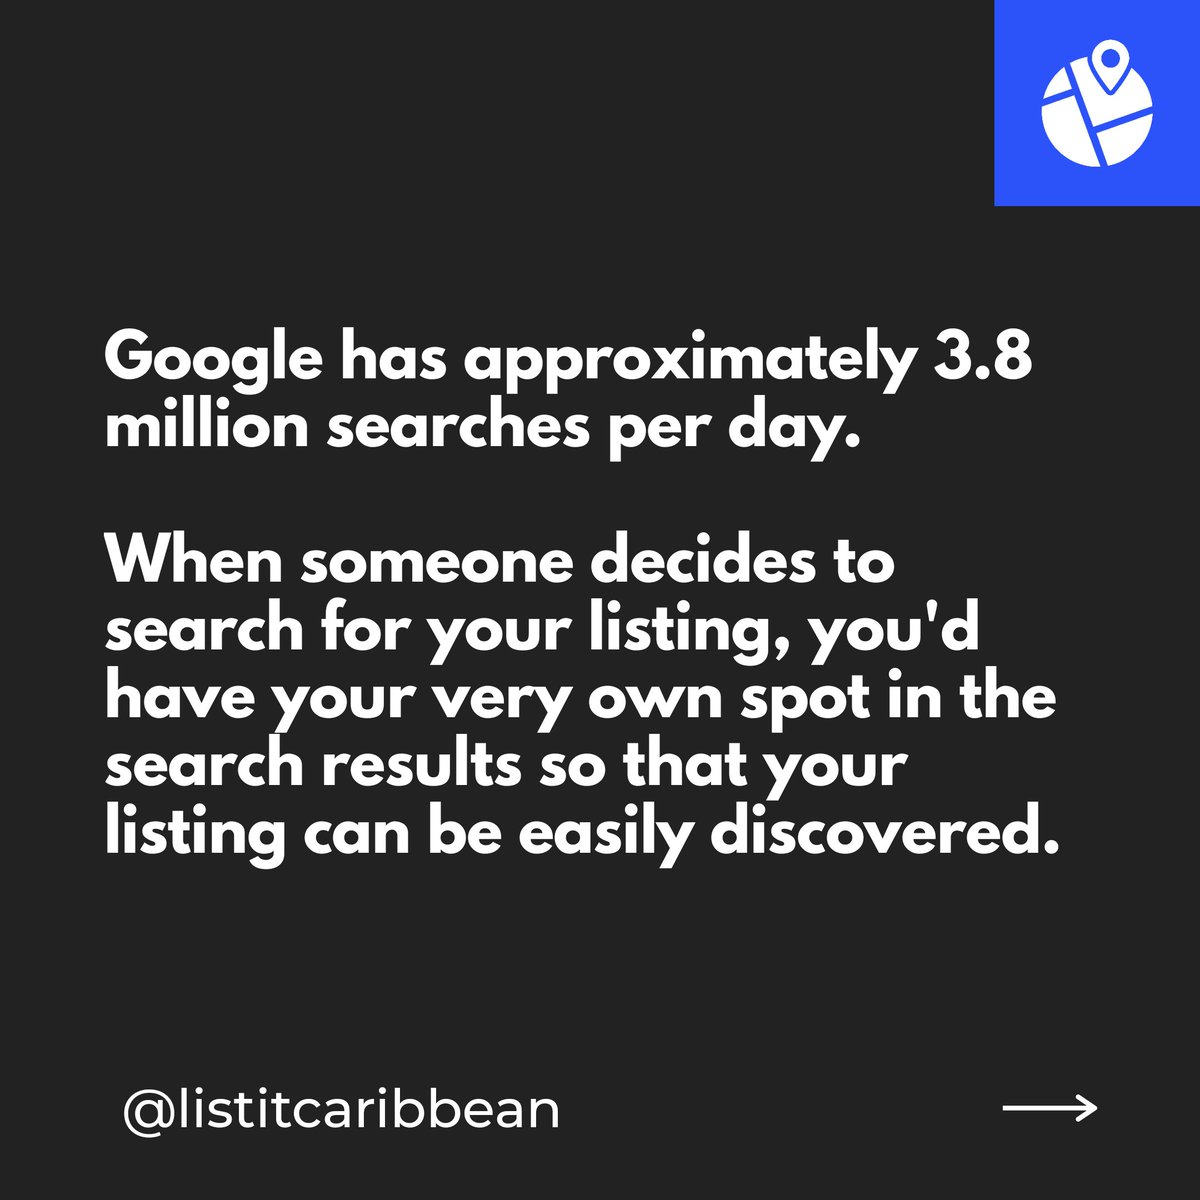 They're so many good reason why you should get listed on List It Caribbean. Today we're highlighting one of the major ones that can take your business to the next level.

#listitcaribbean #seo #google #carribbeanbusiness #carribbeanbusinessowners #caribbeanentrepreneurs